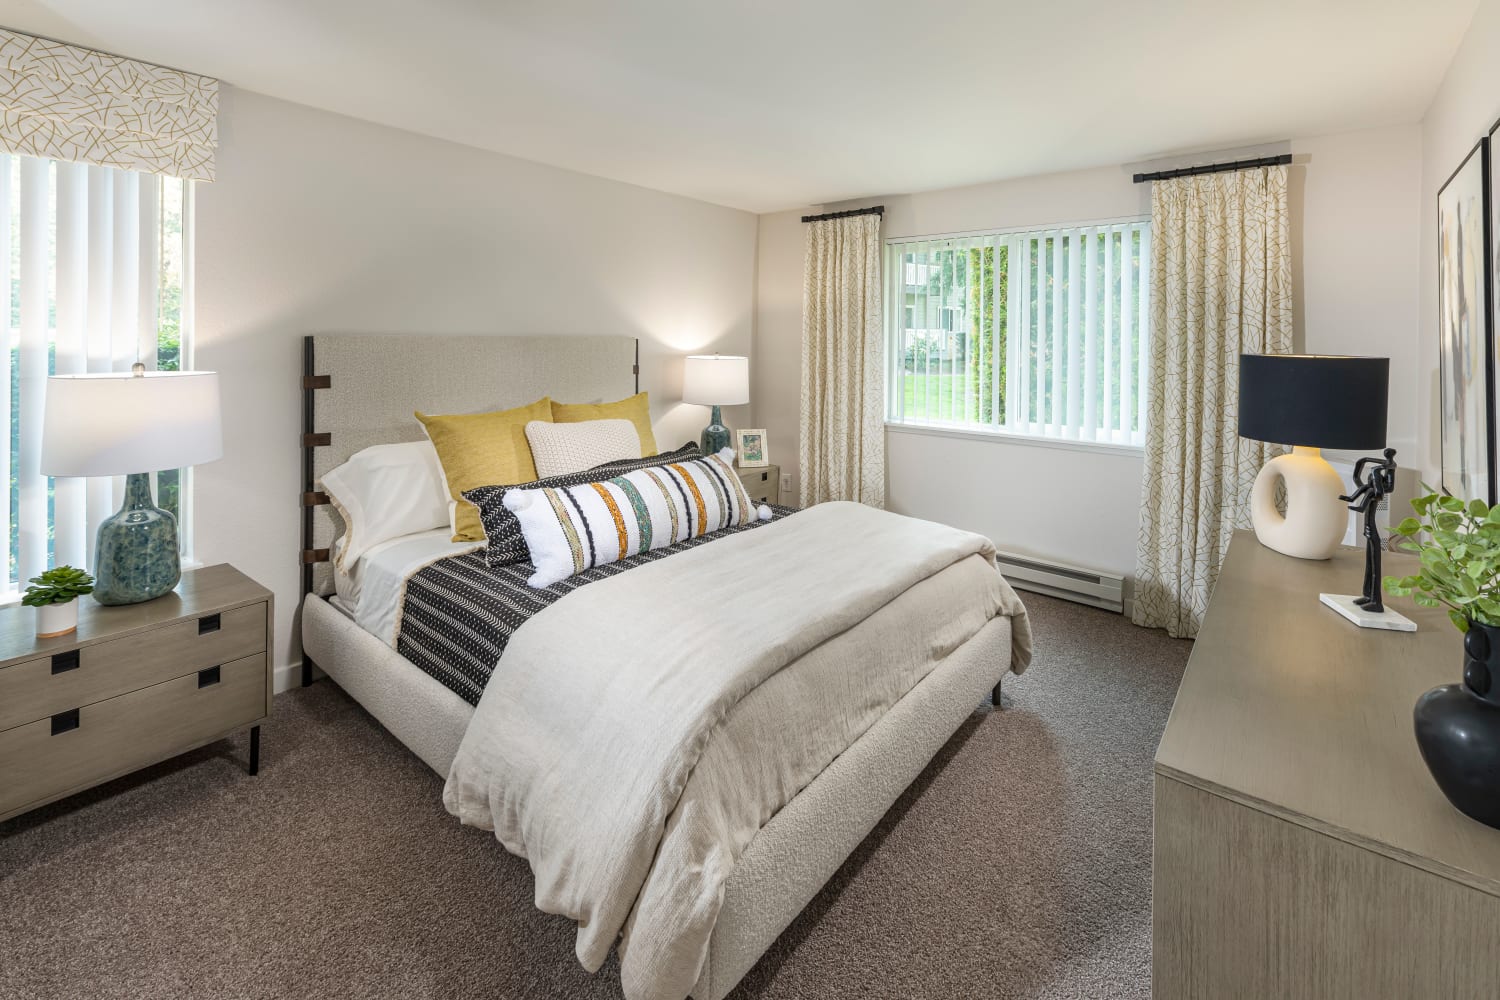 Spacious bedroom with ample natural light from large windows at The Preserve at Forbes Creek in Kirkland, Washington